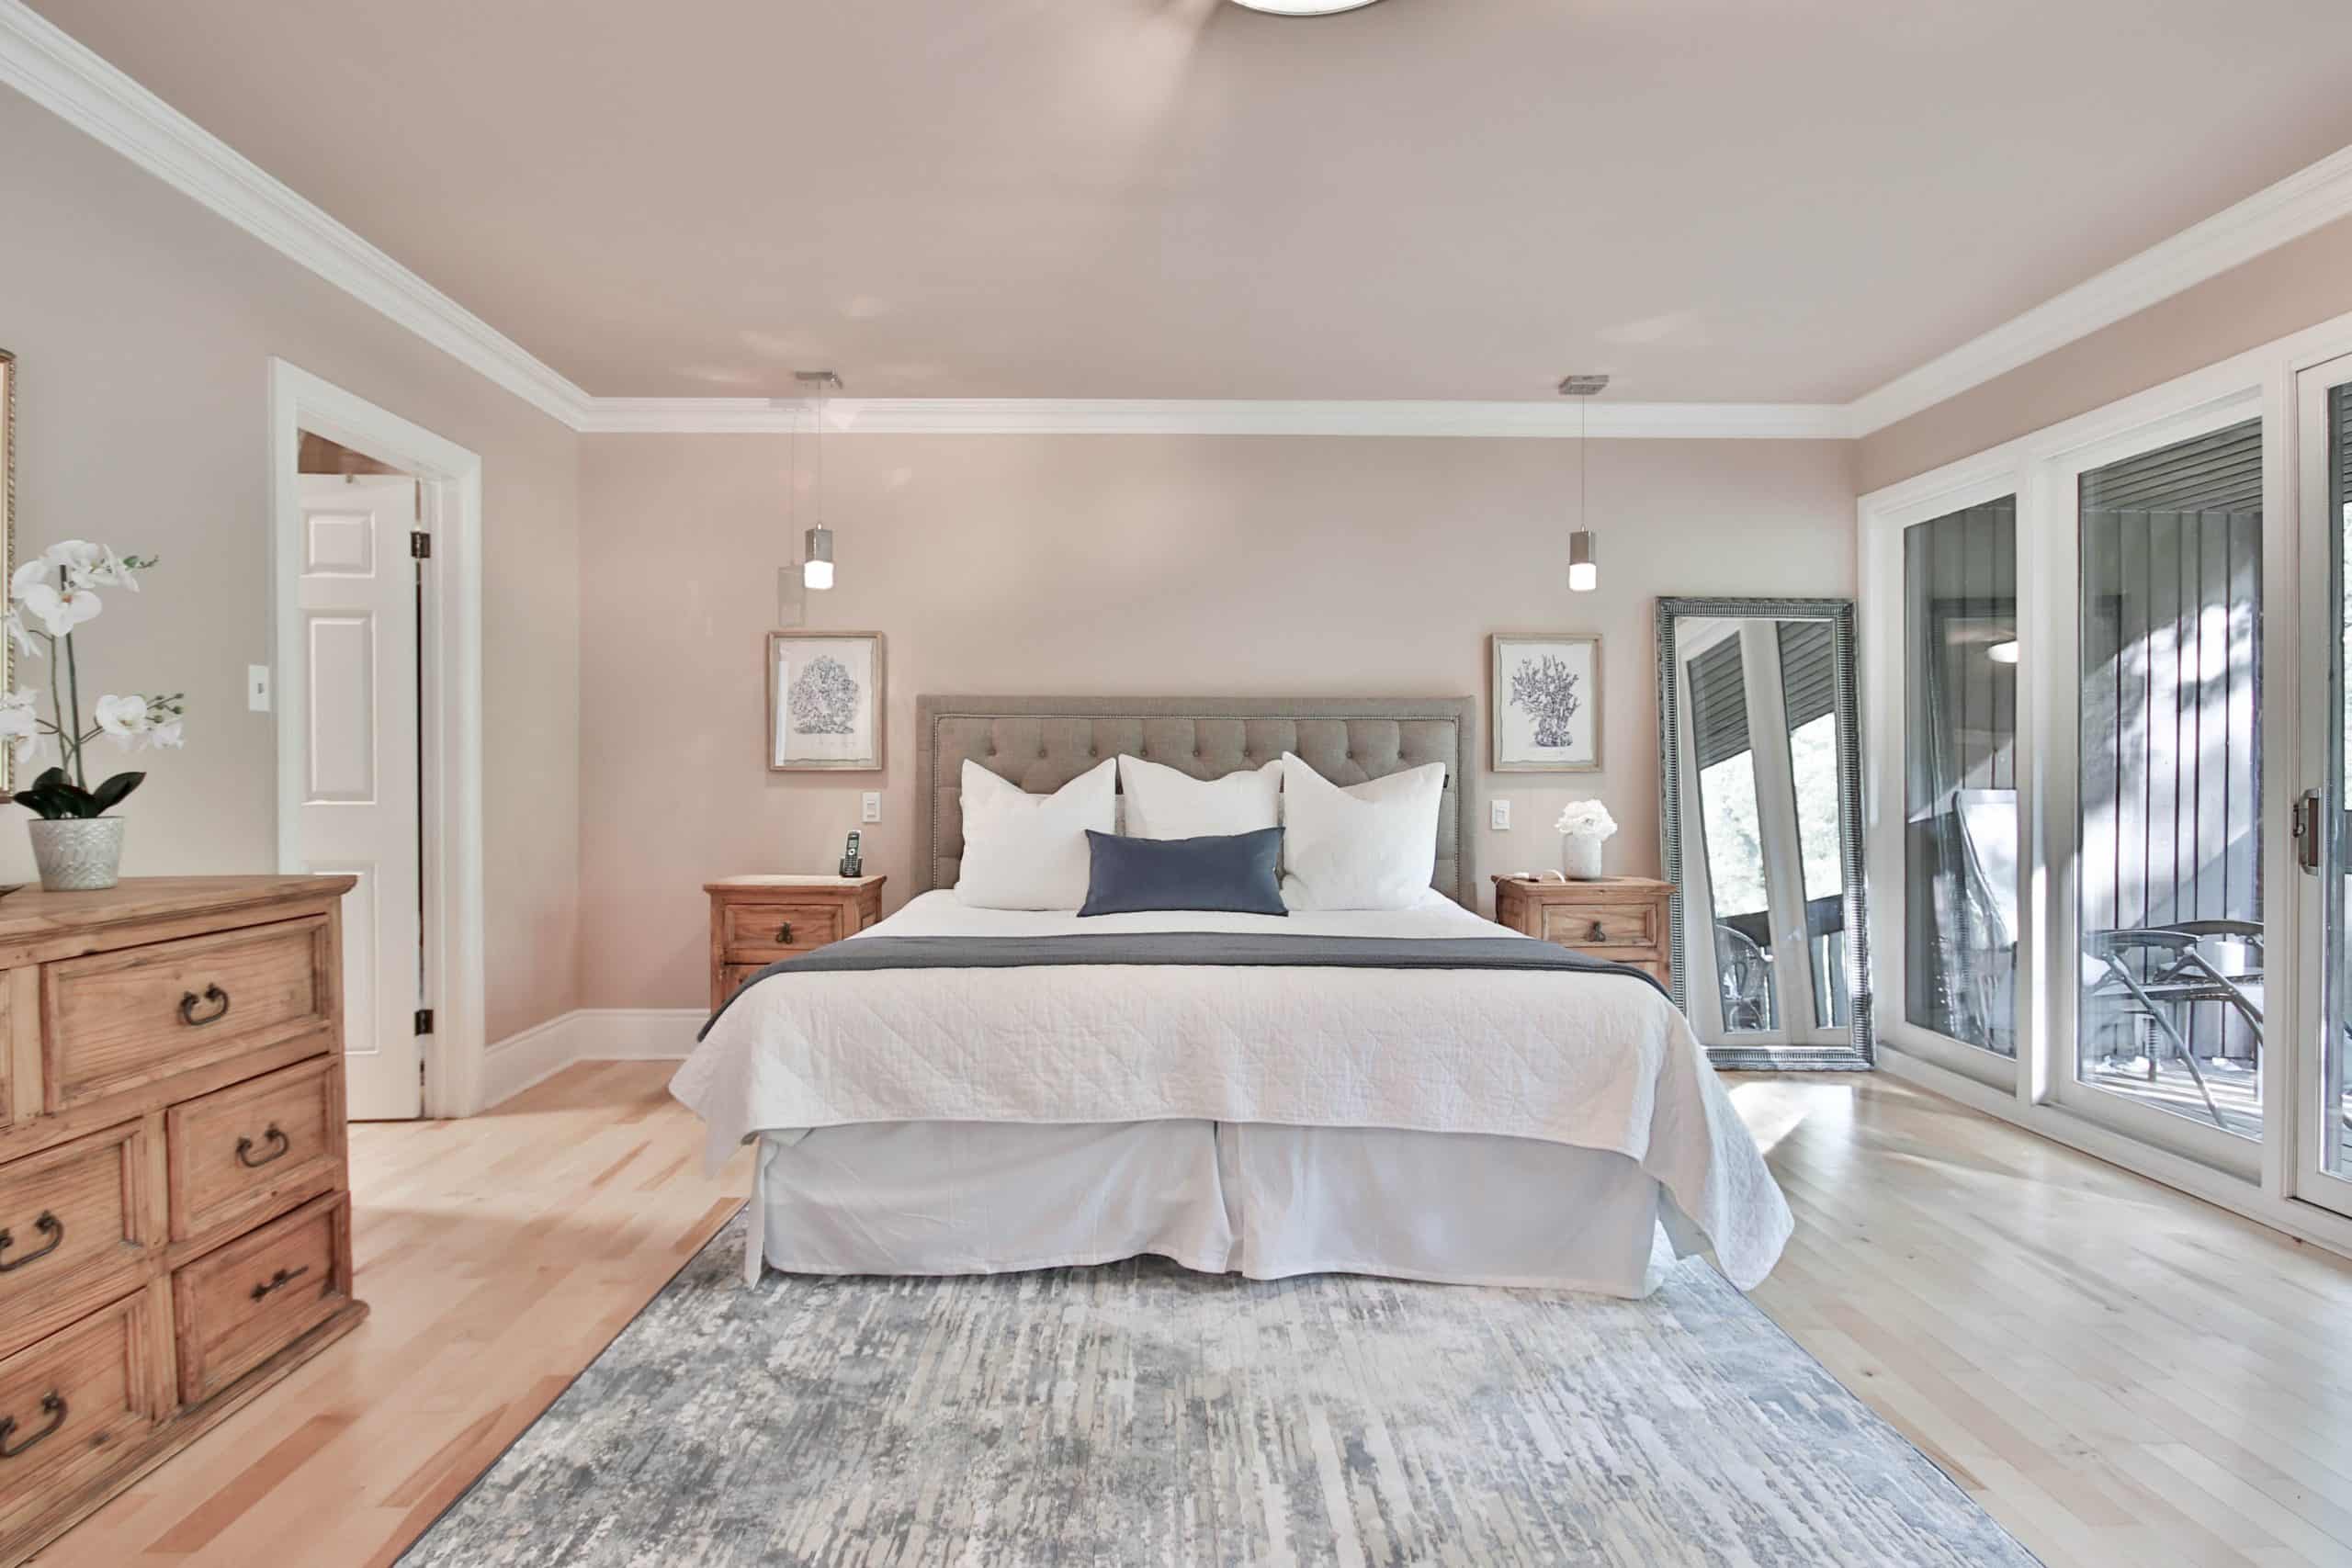 An image of a master bedroom that has been staged to sell in Oakland or East Bay.